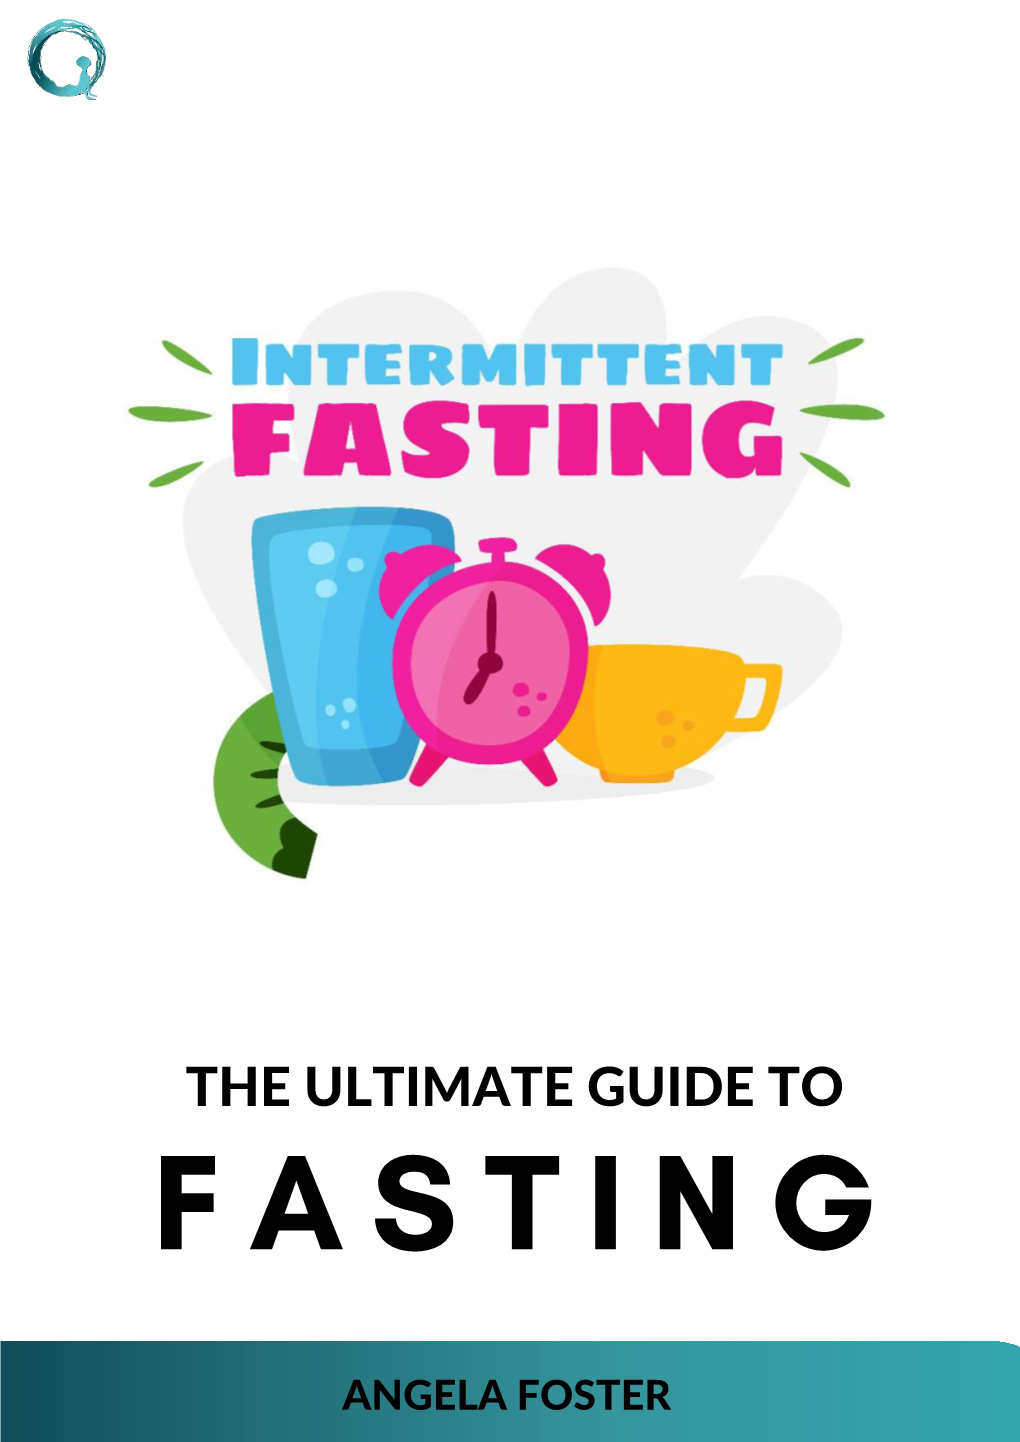 Download Your Free Fasting Guide